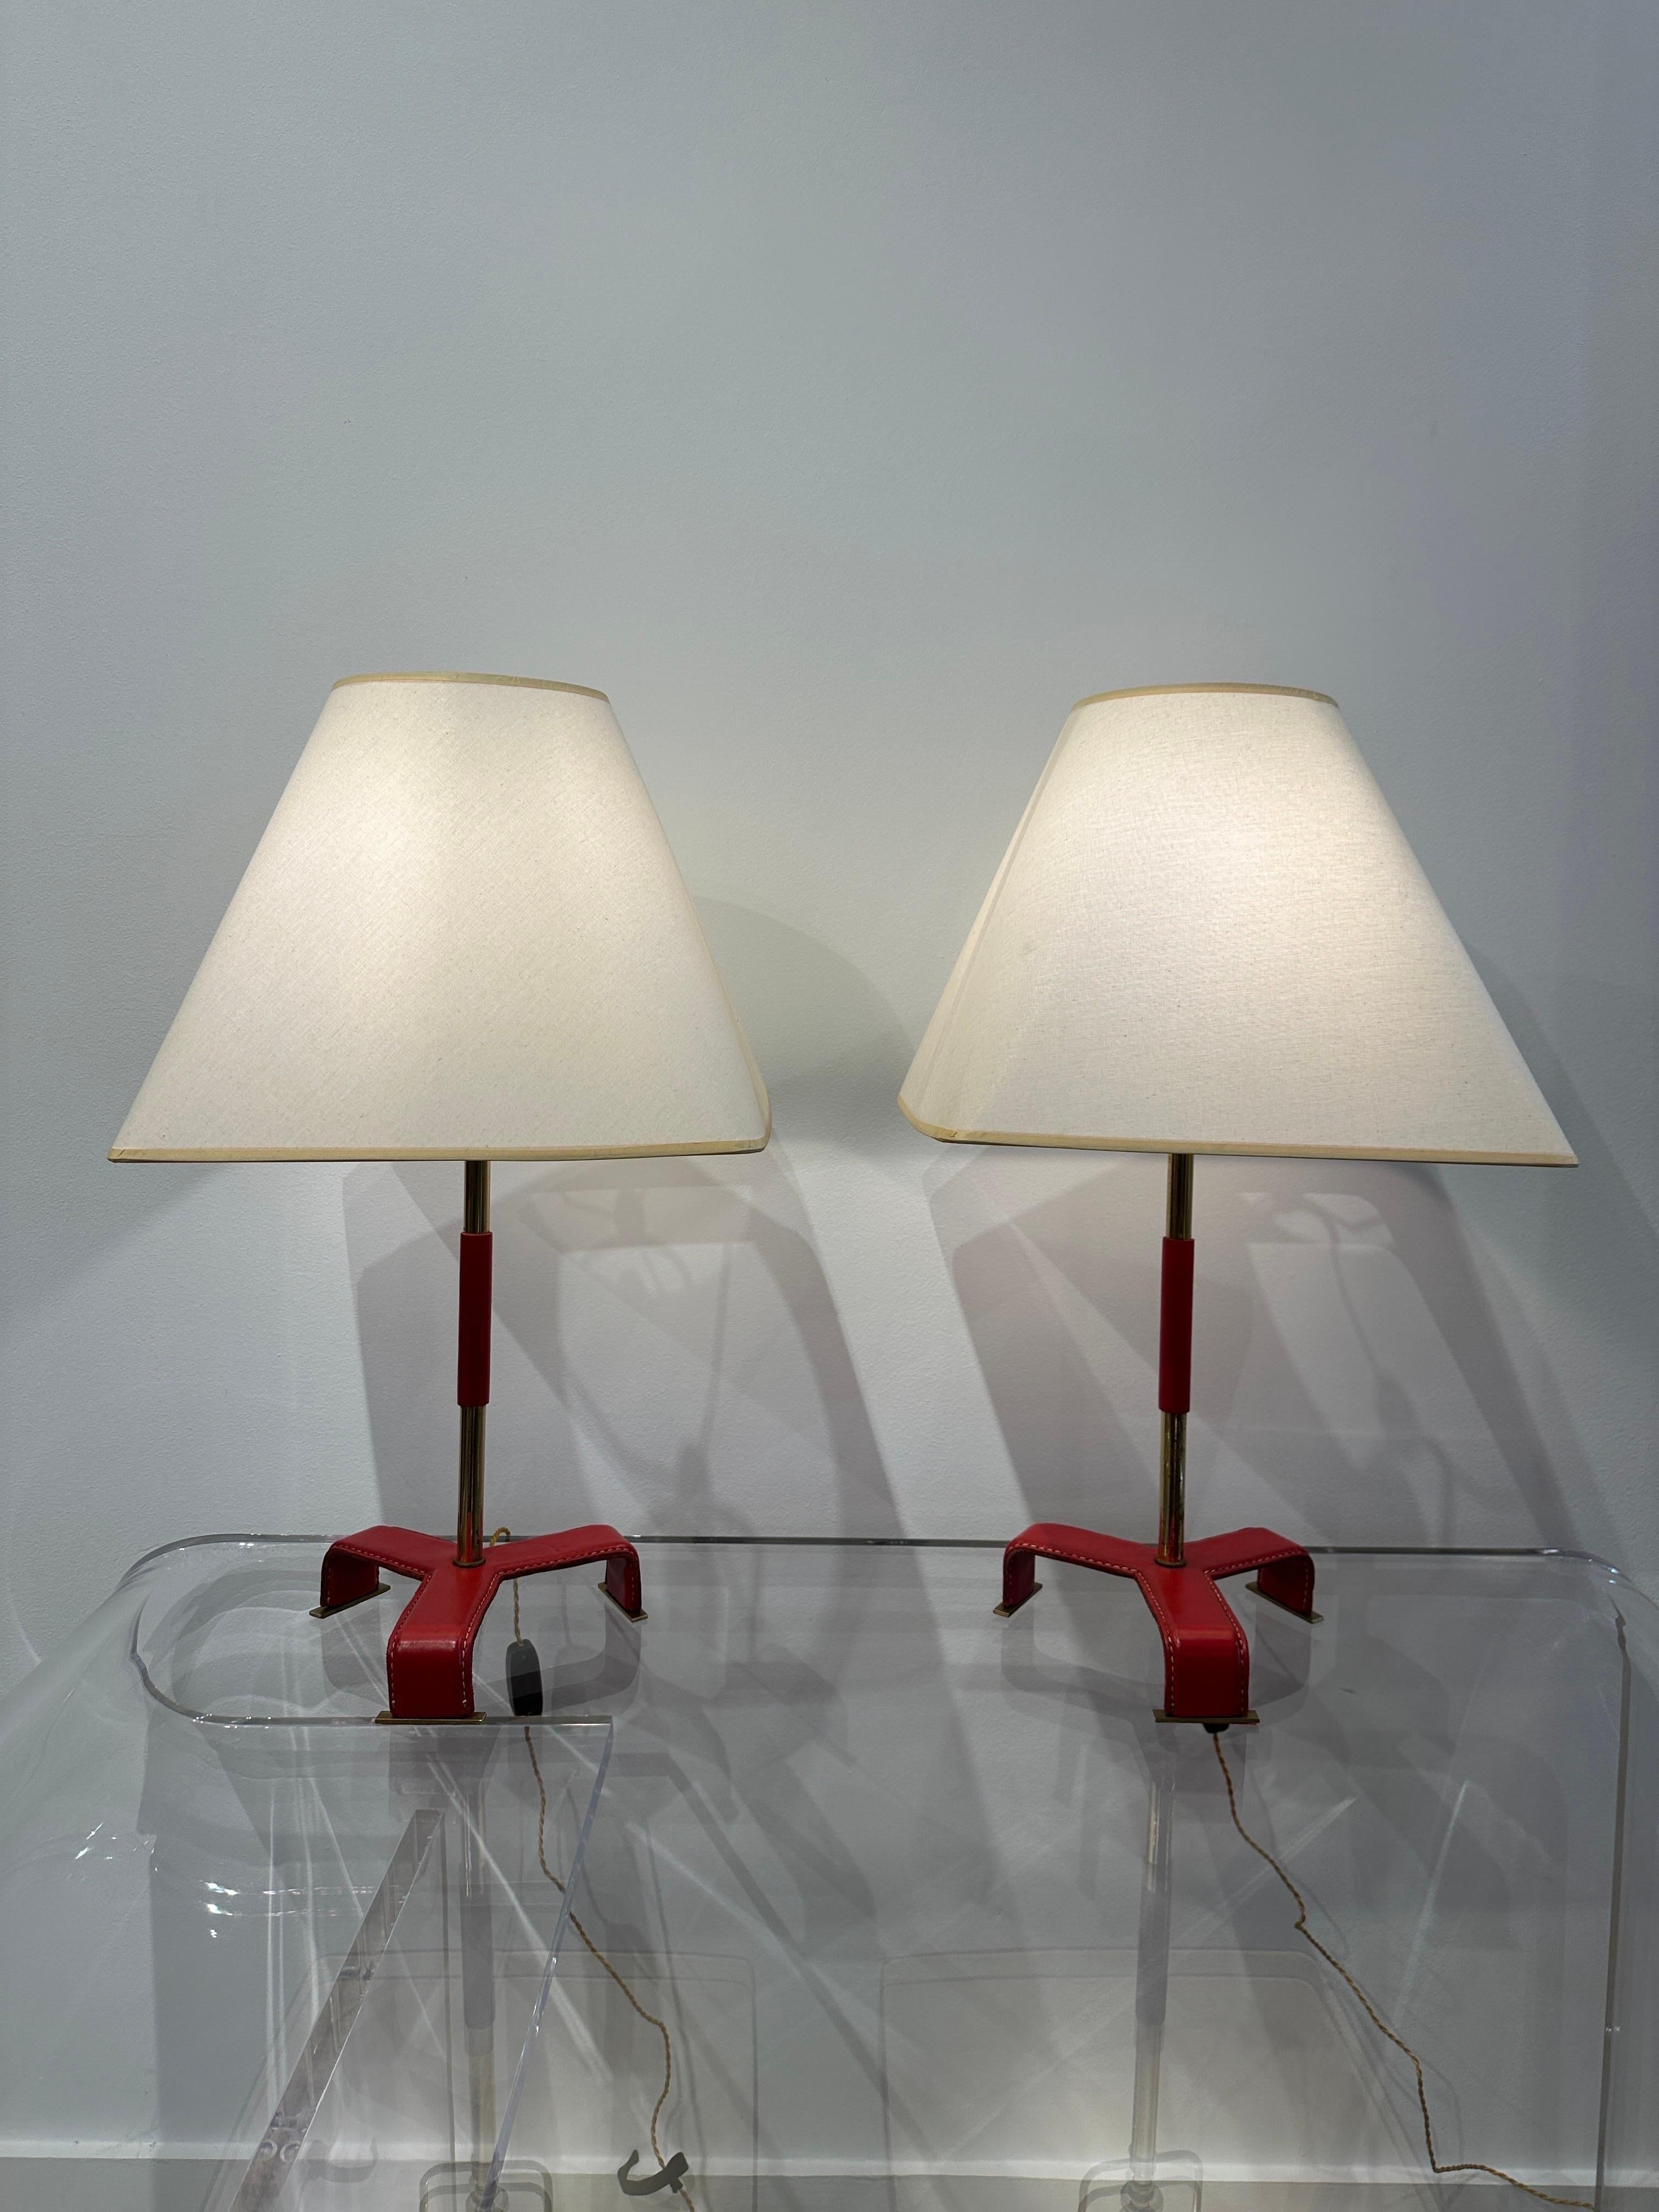 Vintage Pair of Jacques Adnet style Red Stitched Leather Table Lamps, 1950's For Sale 3